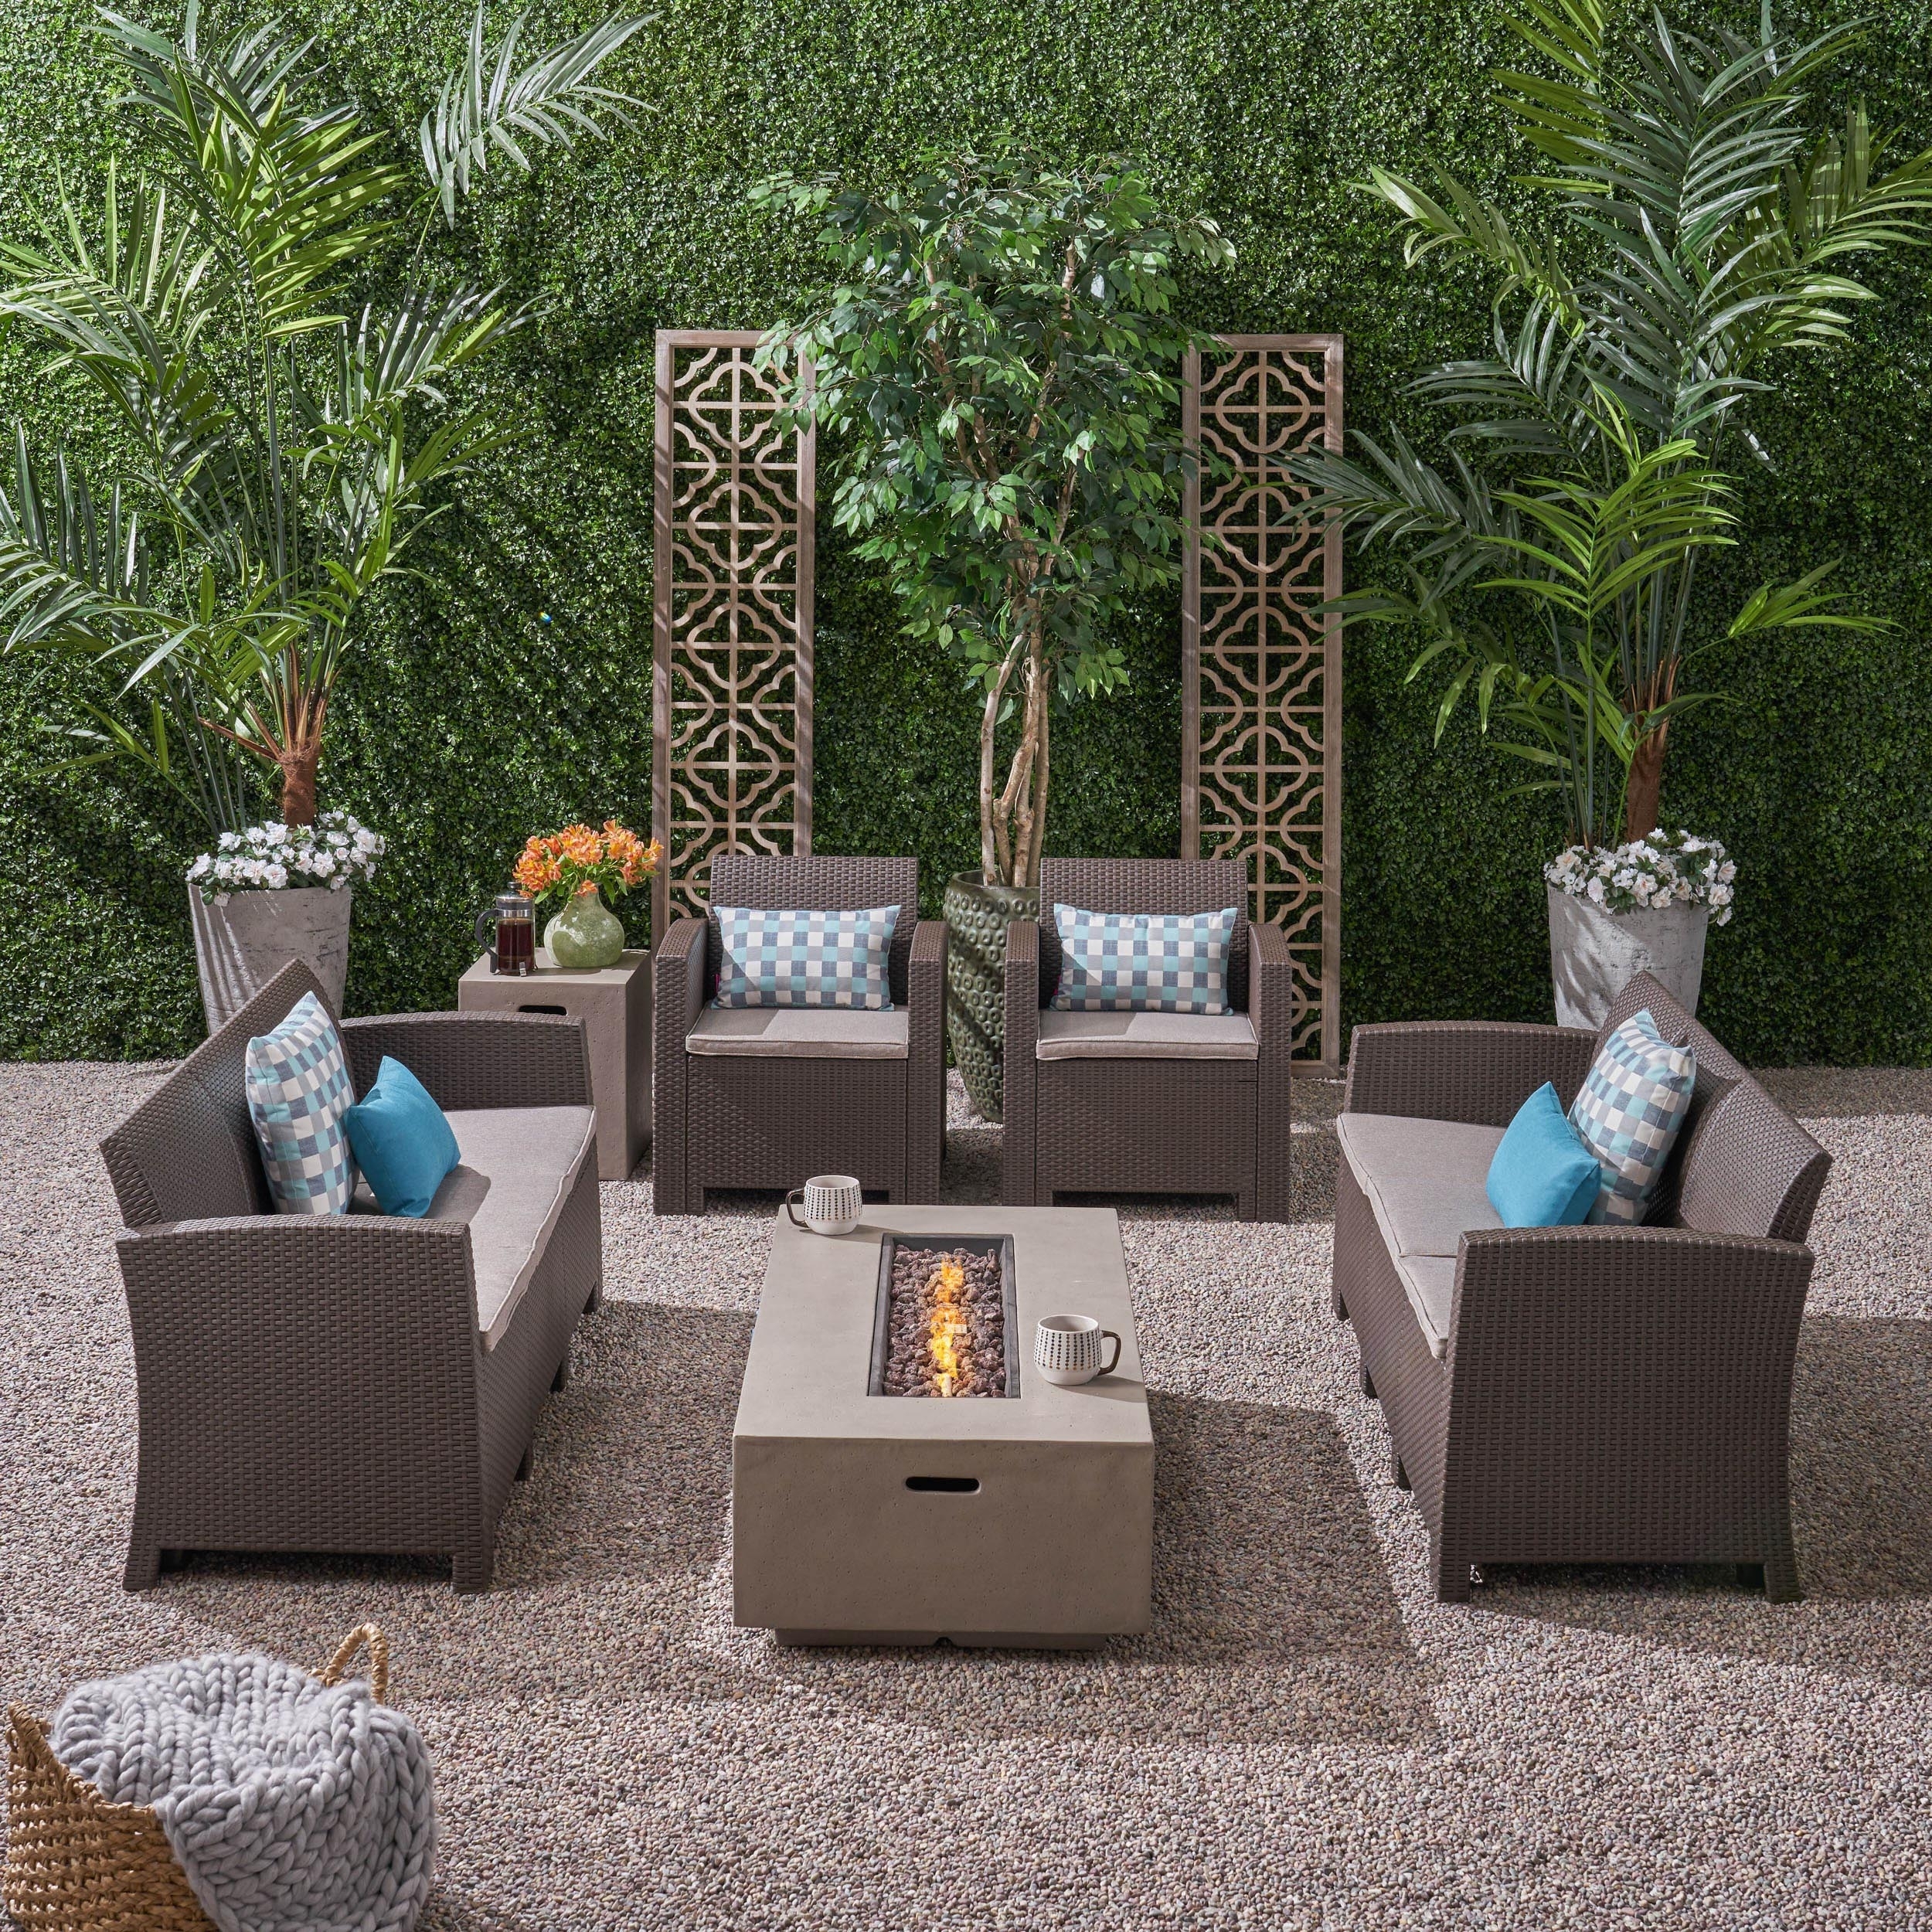 Denise Outdoor Wicker Chat Set with Fire Pit and Tank Holder - brown + mixed beige + light gray